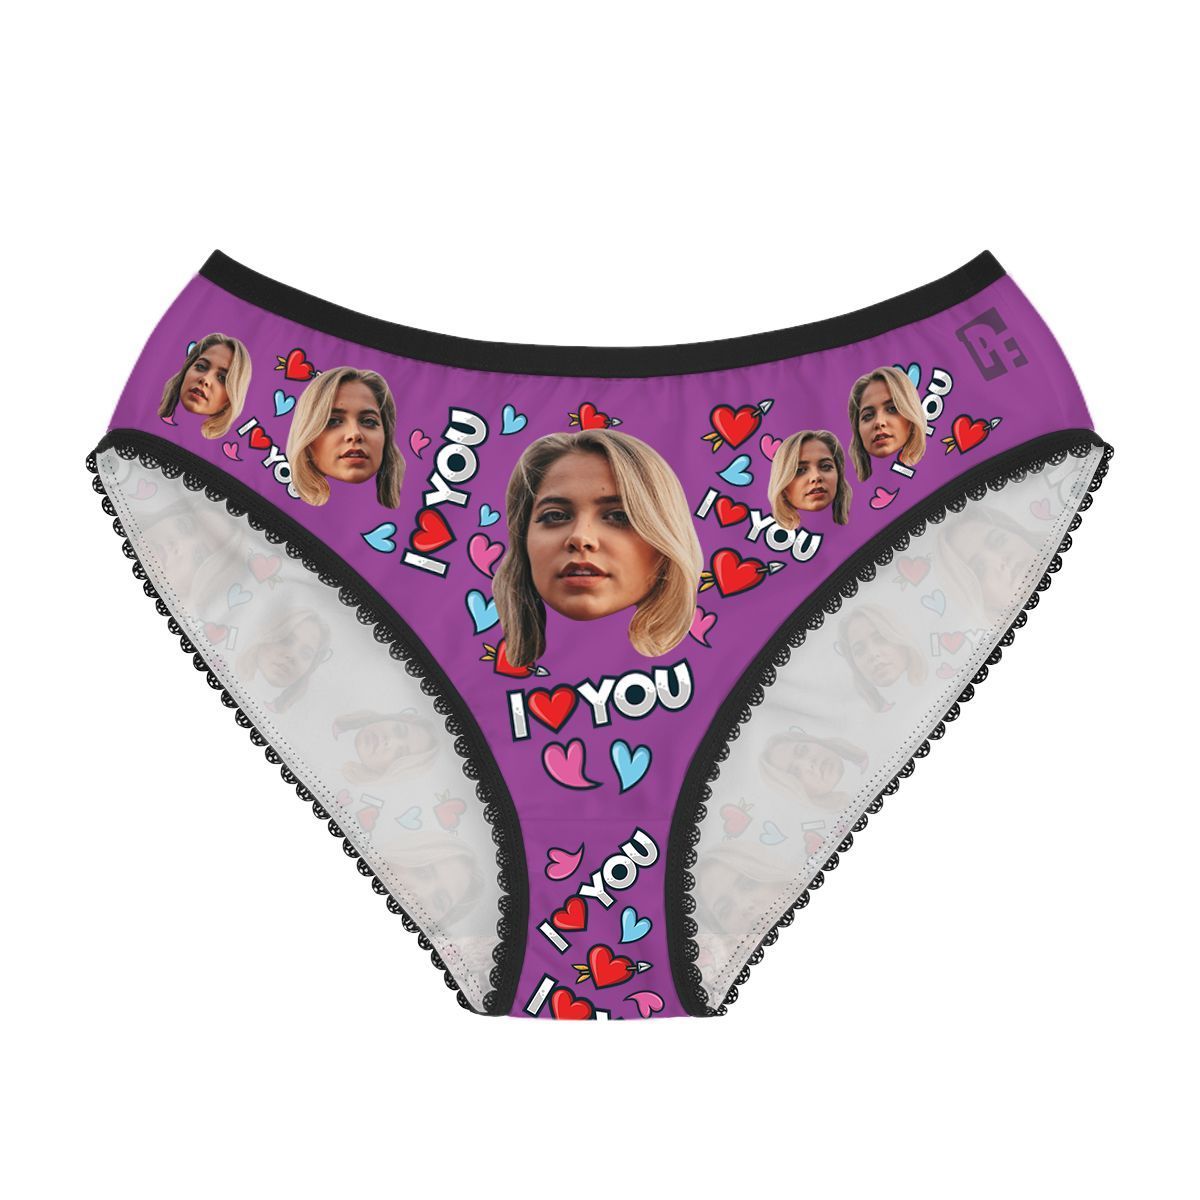 Purple Love you women's underwear briefs personalized with photo printed on them